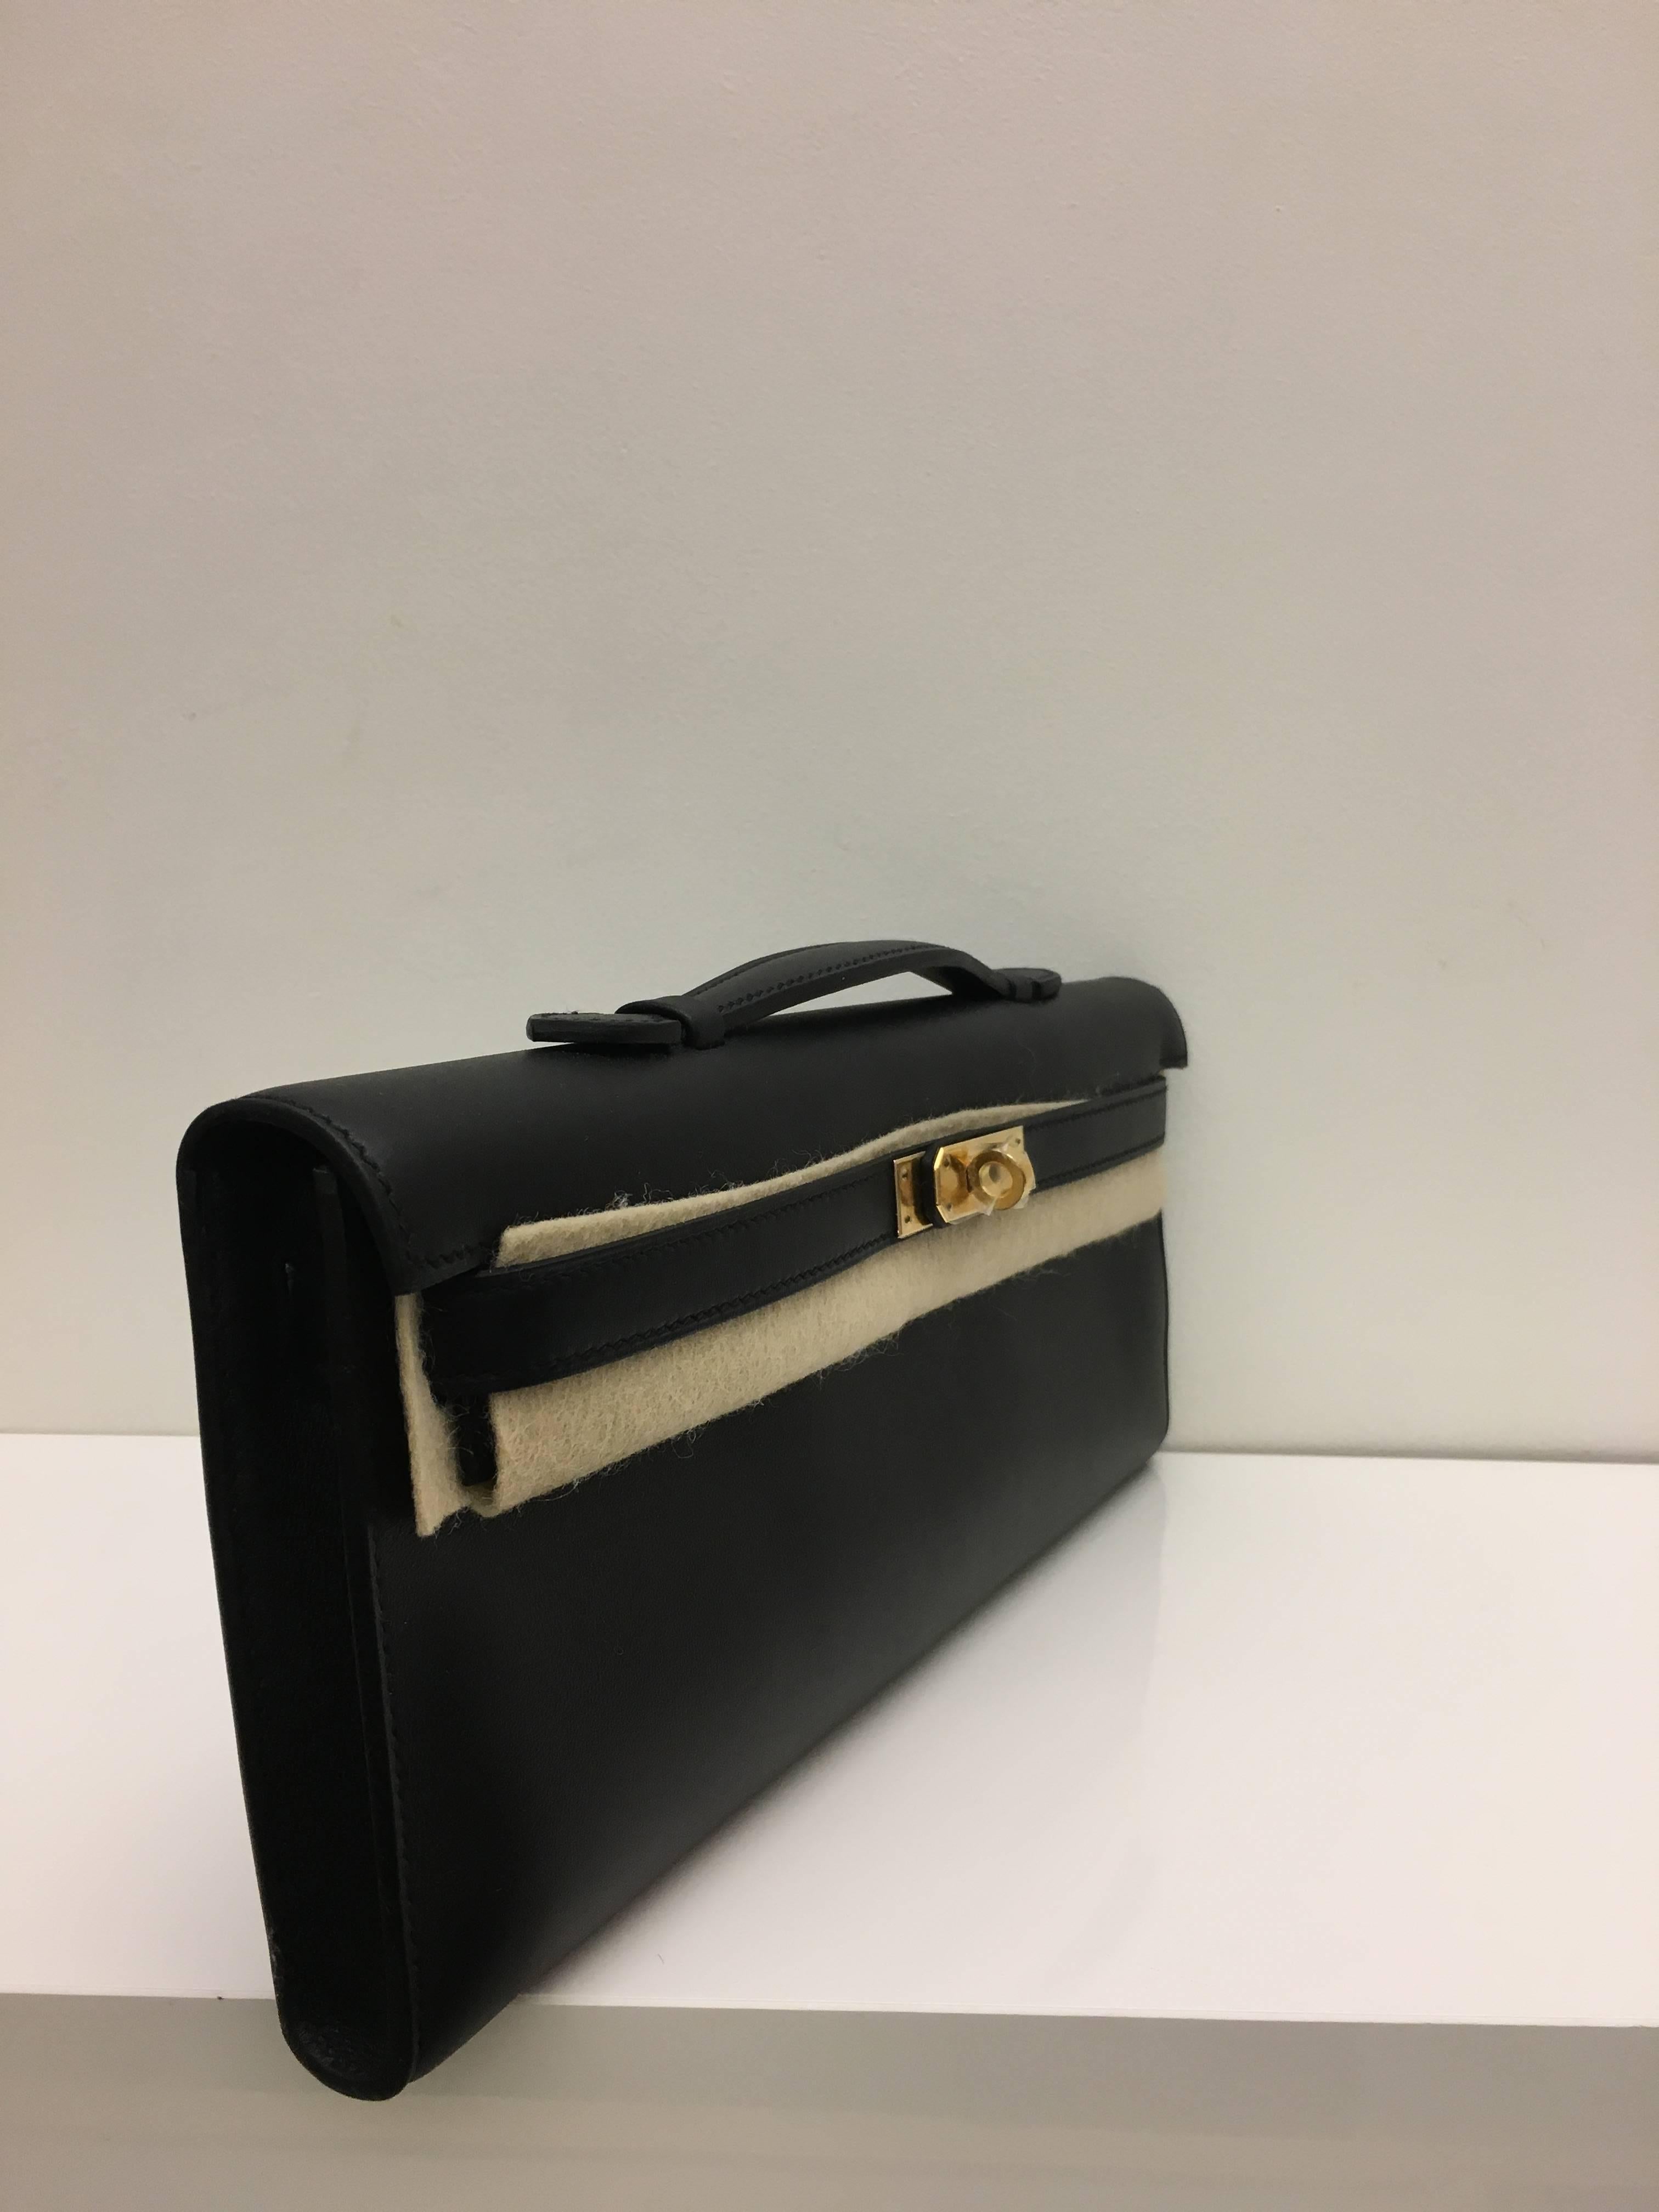 Hermes 
Kelly Cut
Swift Leather 
Colour Black (Noir)
Gold Hardware 
store fresh, comes with receipt and full set (dust bag, box...) 
Hydeparkfashion specializes in sourcing and delivering authentic luxury handbags, mainly Hermes, to client